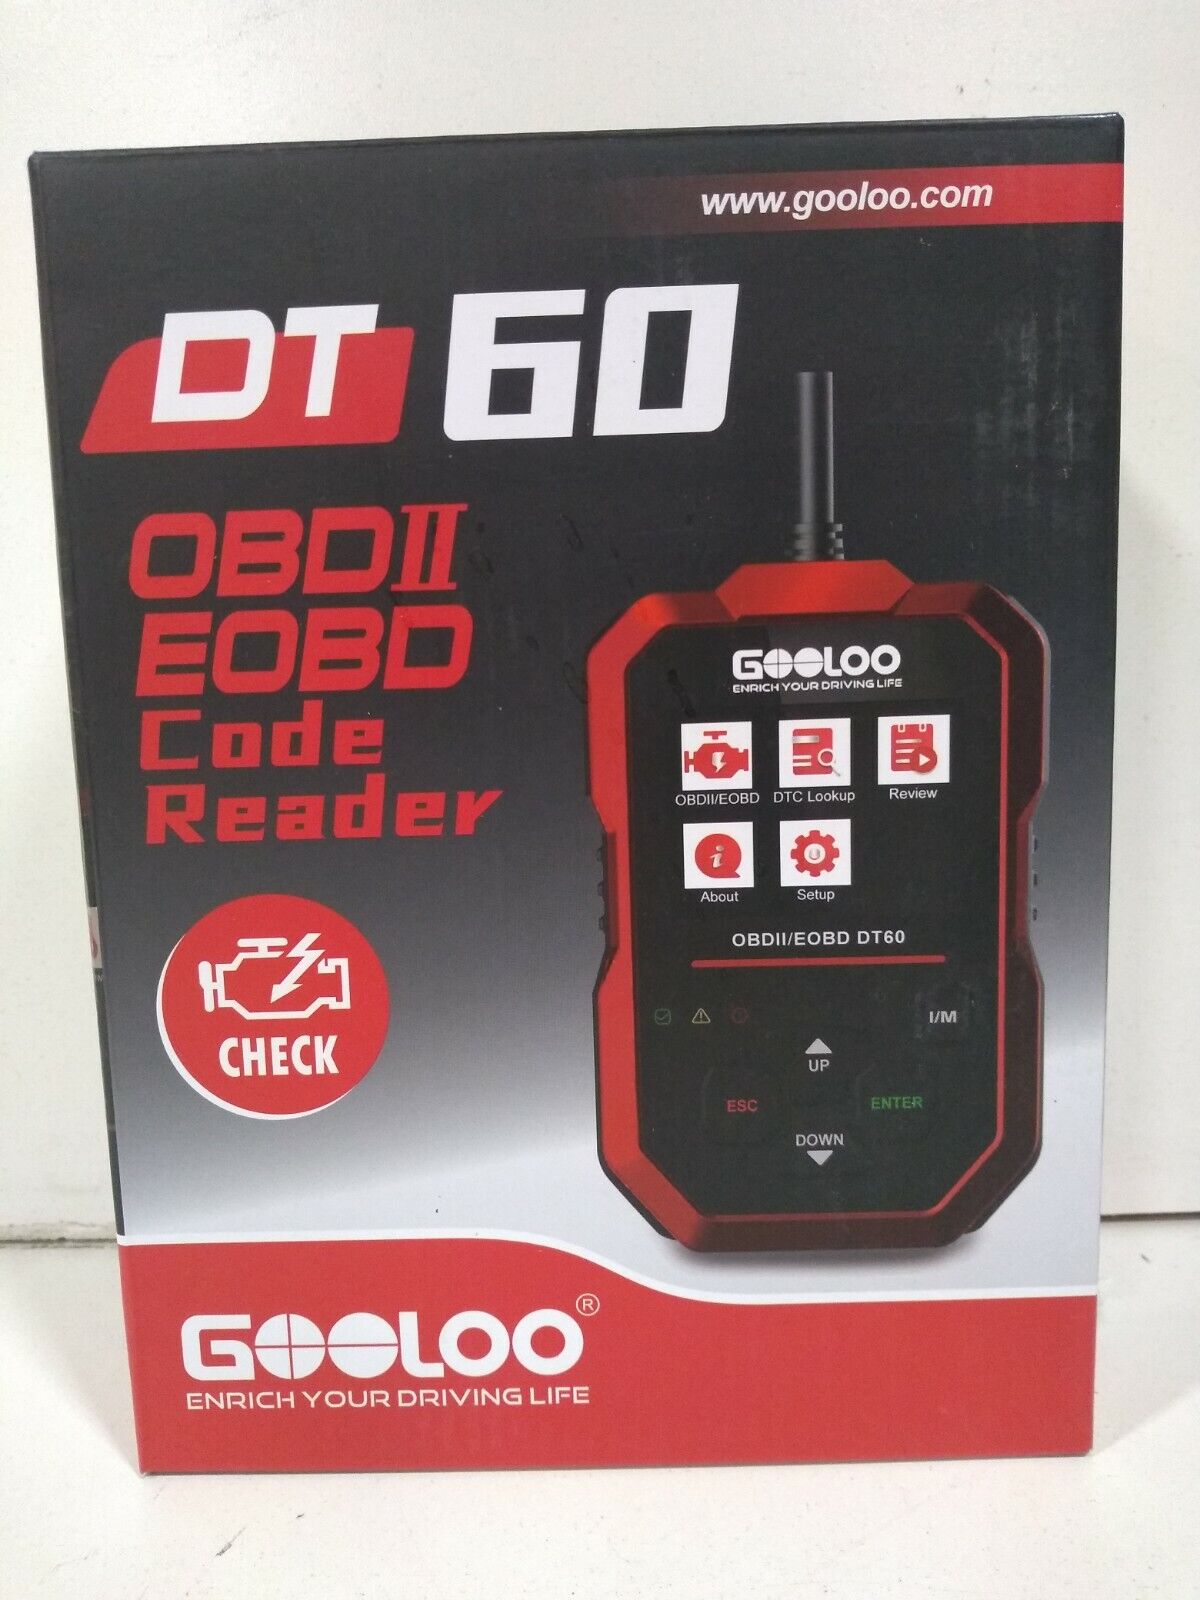 Vehicle Code Reader GOOLOO DT60 OBDII Fresno Mall Er Read Clear EOBD Quantity limited Codes